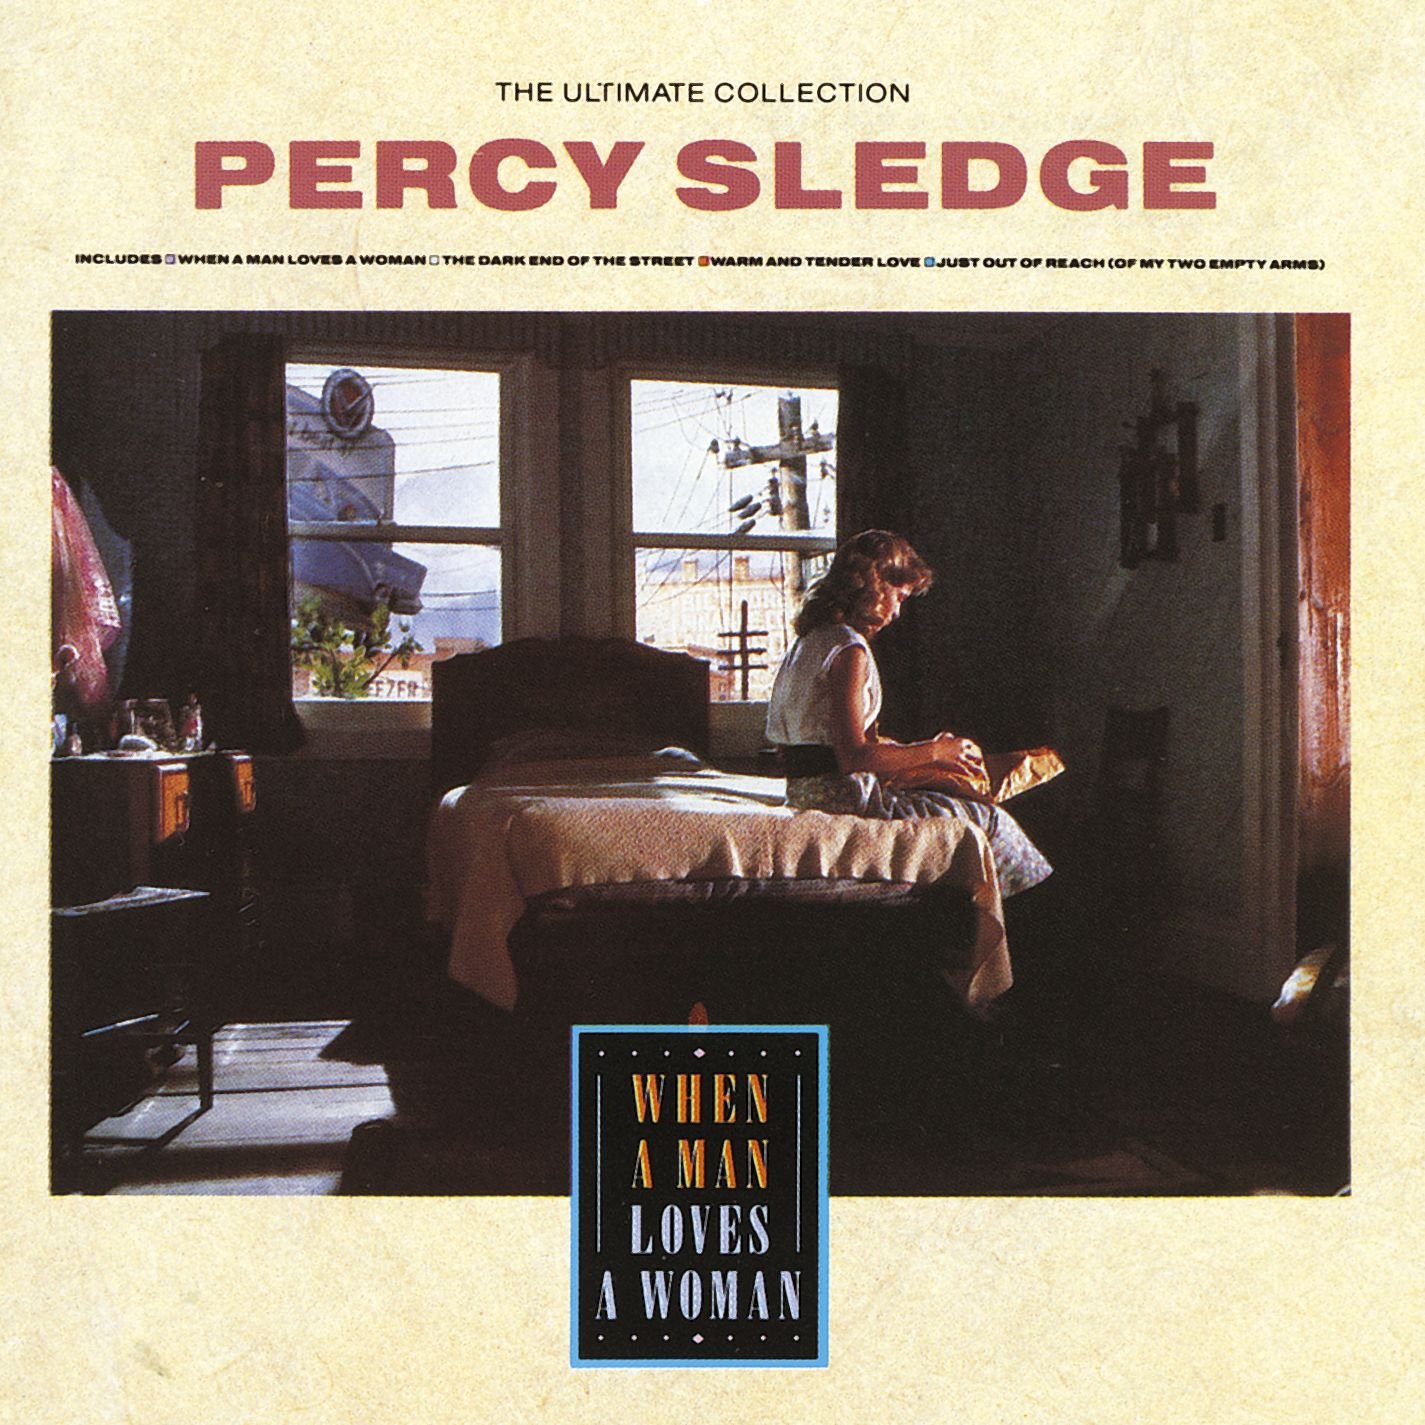 PERCY SLEDGE - THE ULTIMATE COLLECTION